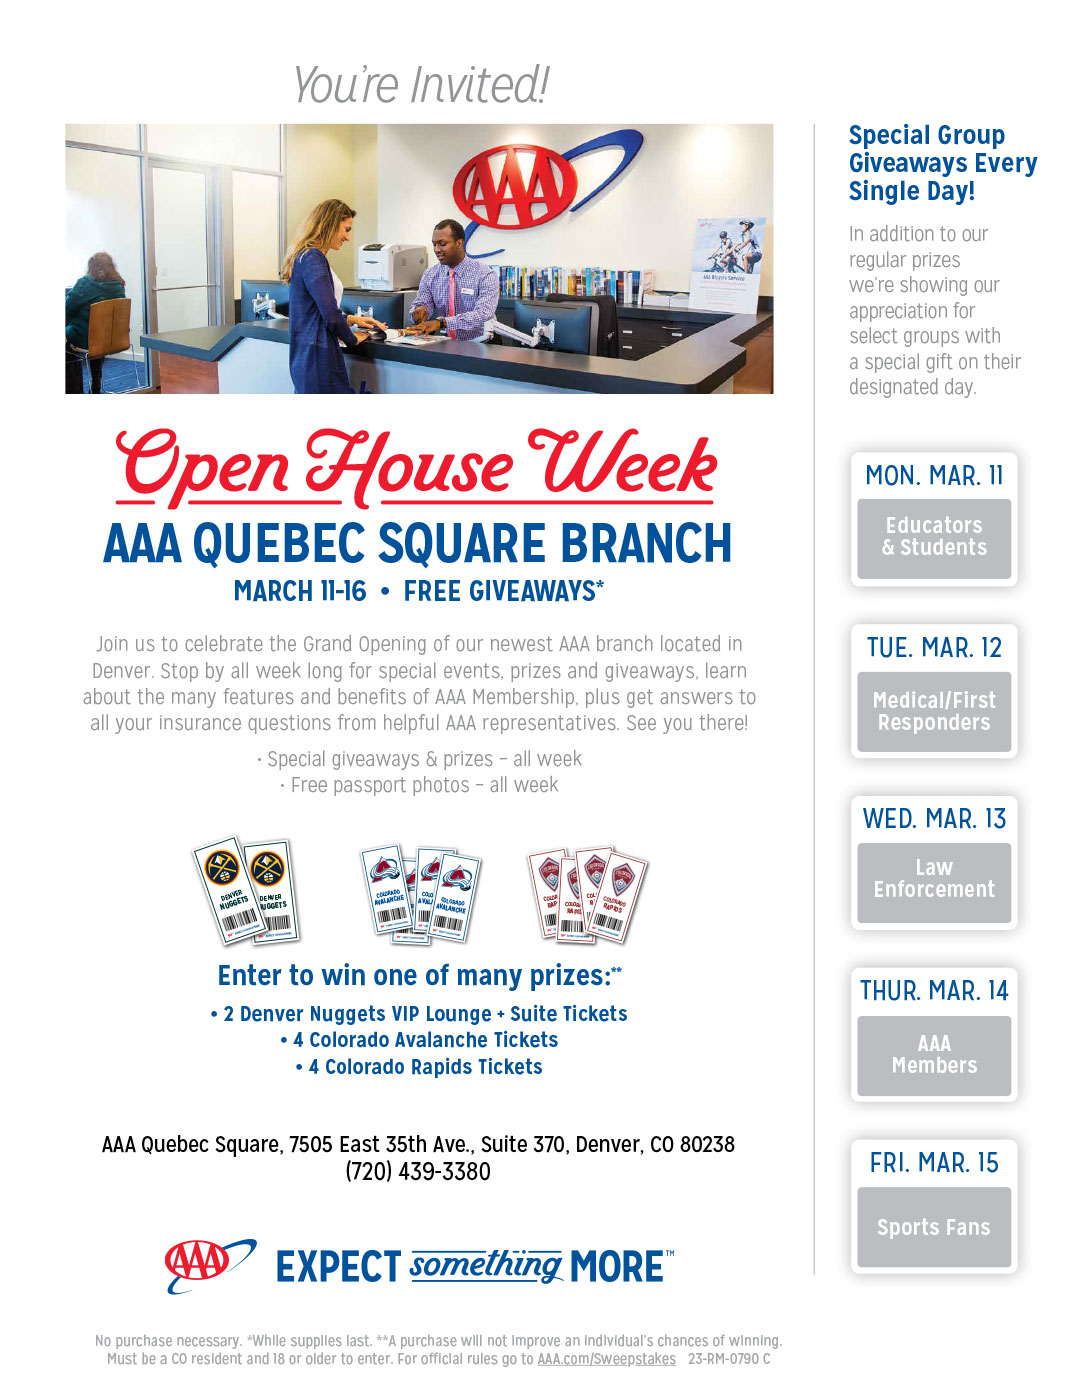 AAA Quebec Square Grand Opening Week